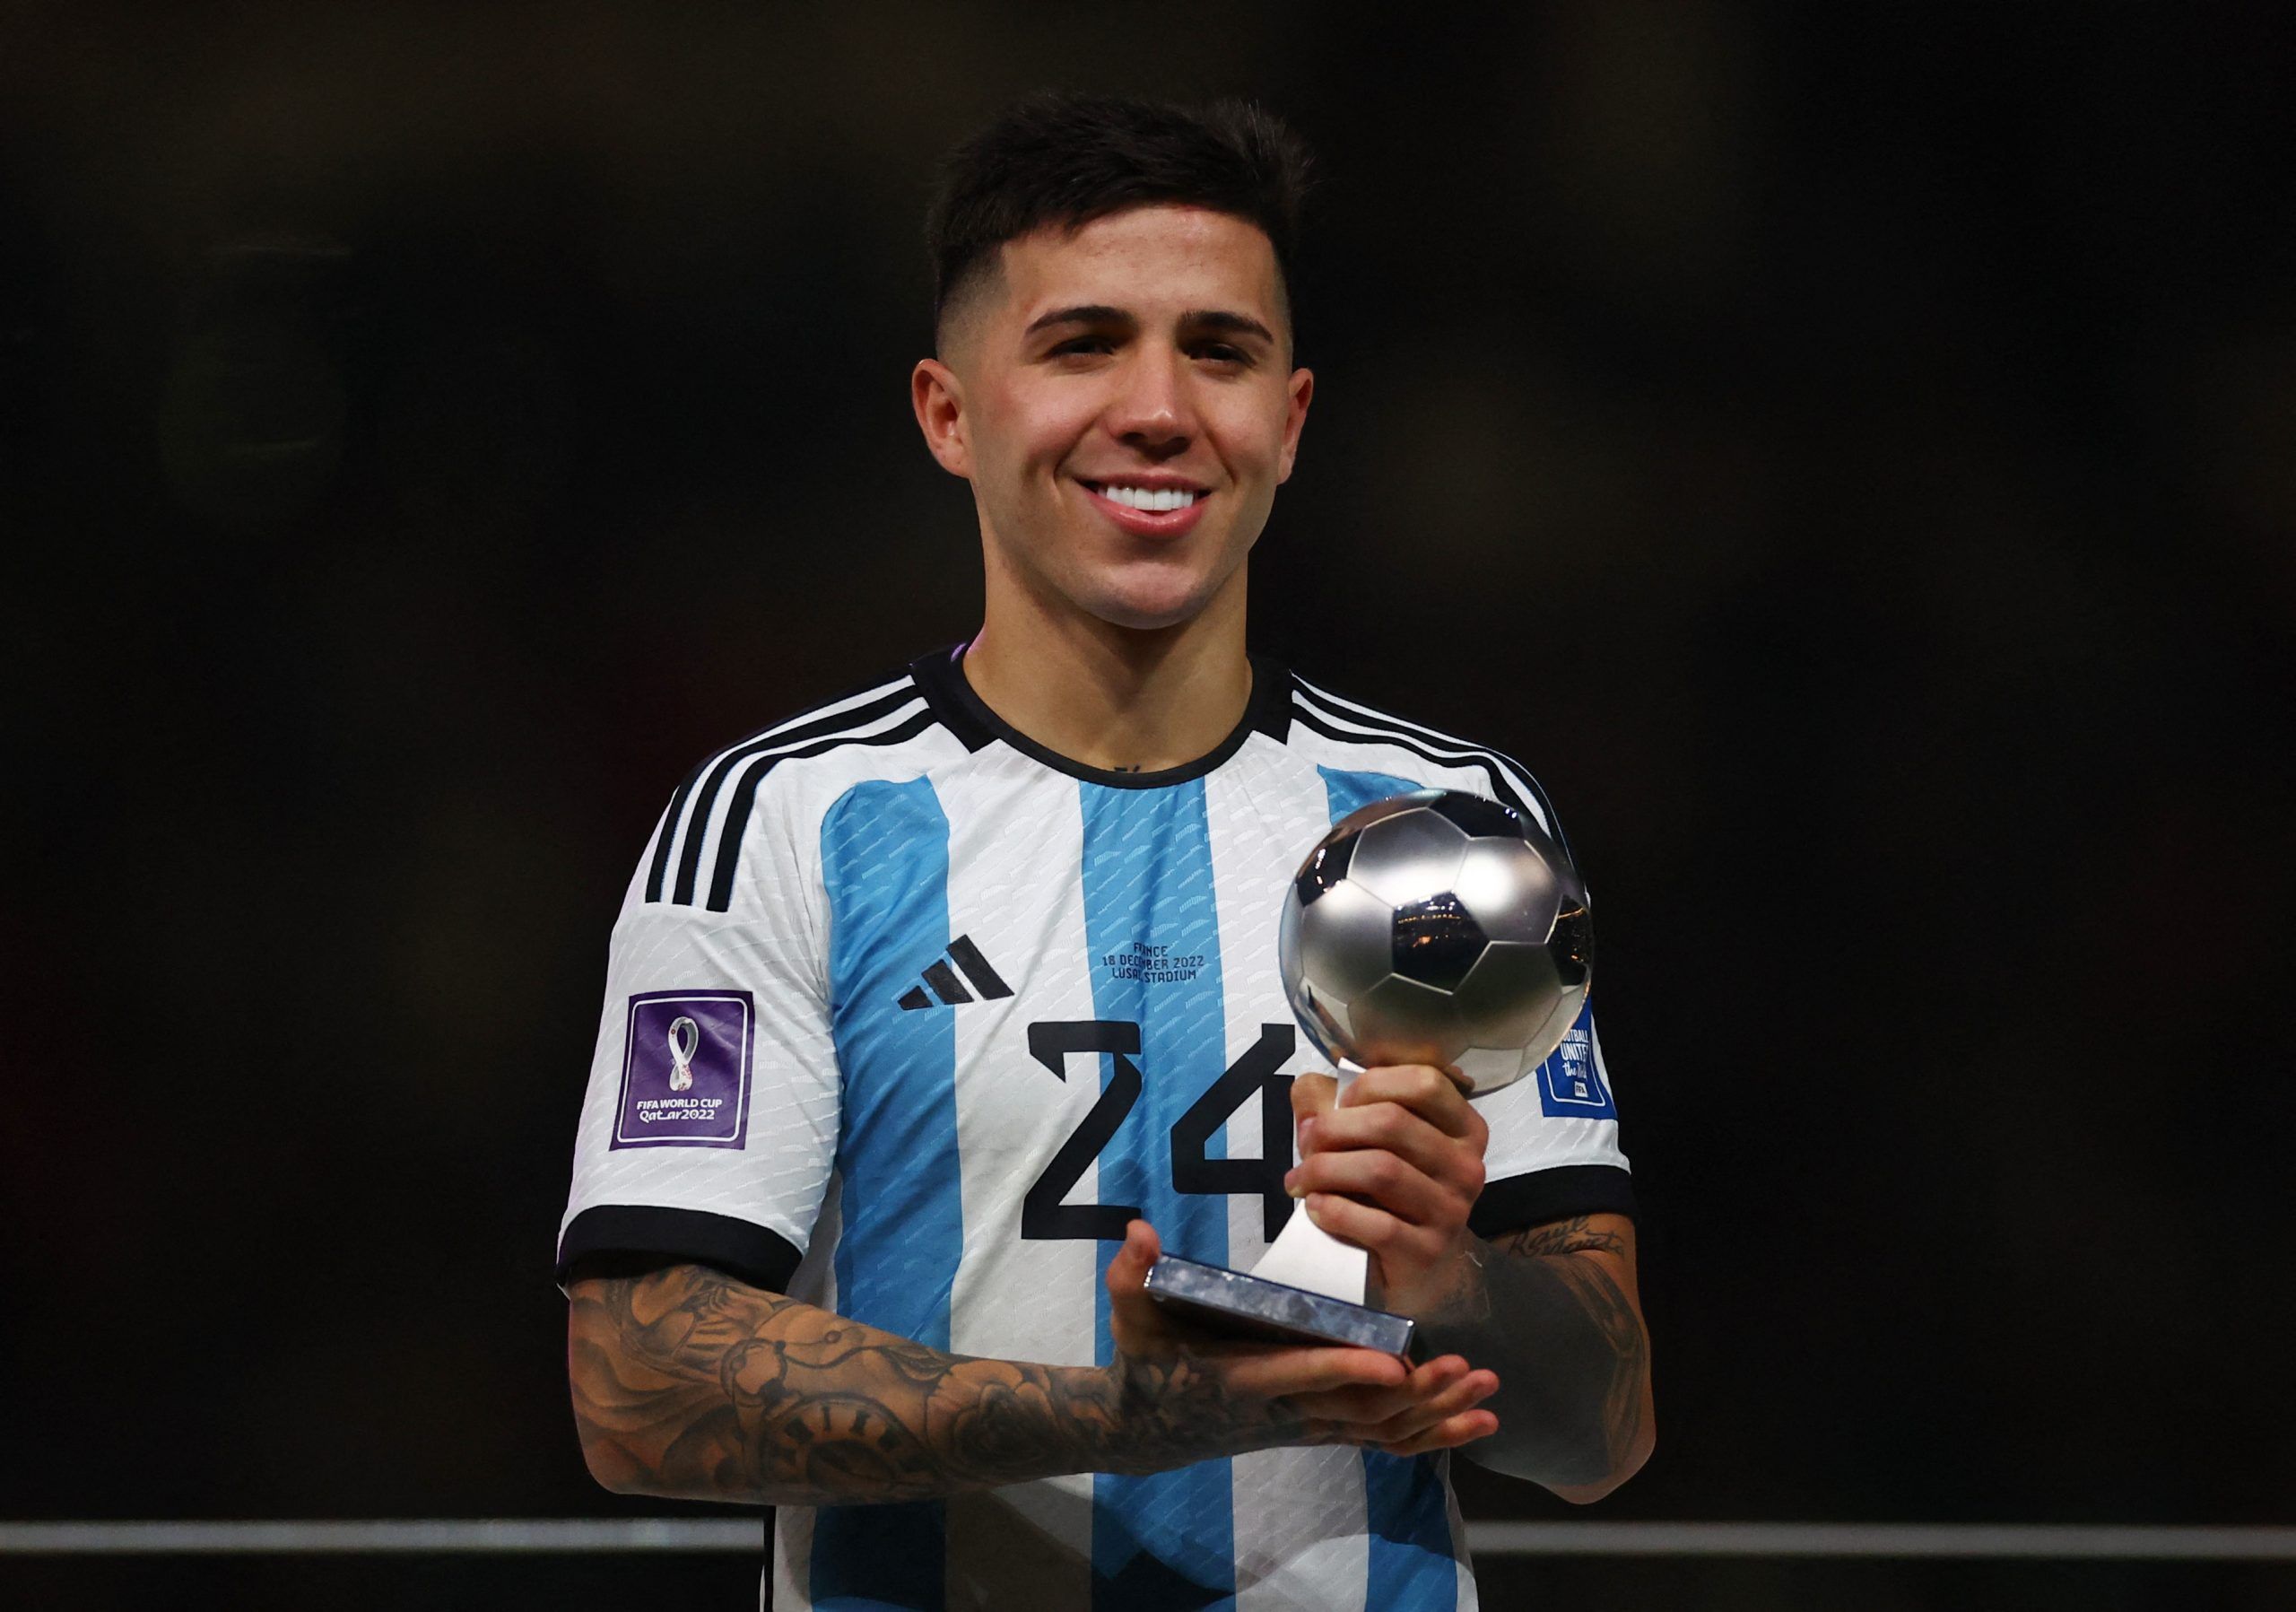 Soccer Football - FIFA World Cup Qatar 2022 - Final - Argentina v France - Lusail Stadium, Lusail, Qatar - December 18, 2022 Argentina's Enzo Fernandez poses with his Best Young Player award during the award ceremony after the match REUTERS/Kai Pfaffenbach